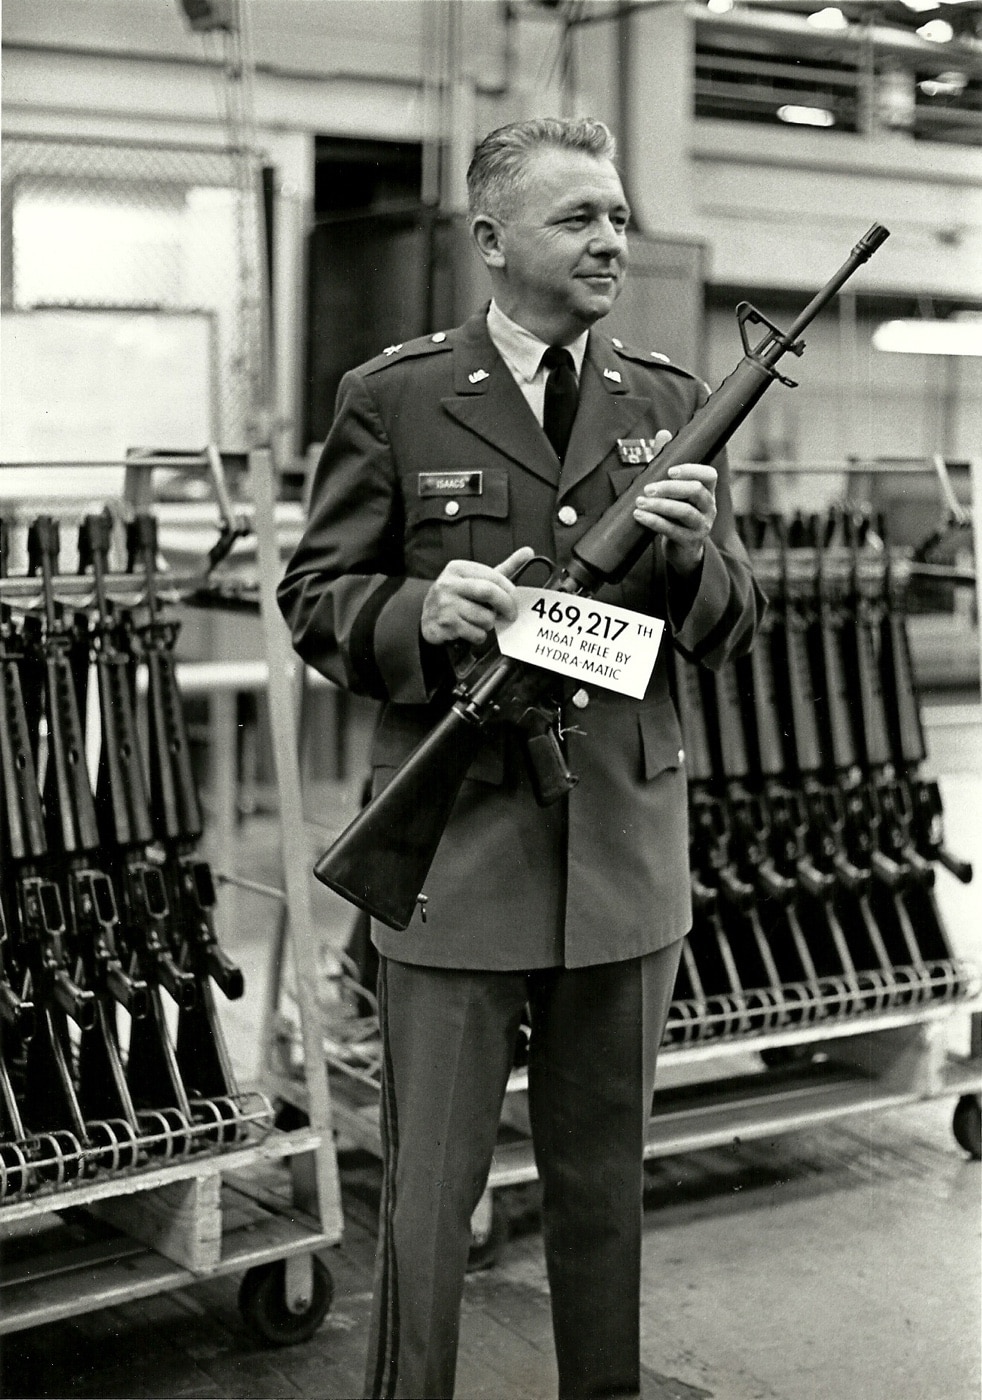 U.S. Army Brigadier General Alvin C. Isaacs and the 469,217th GM Hydra-Matic M16A1. Image: Dr. Laura Rankin